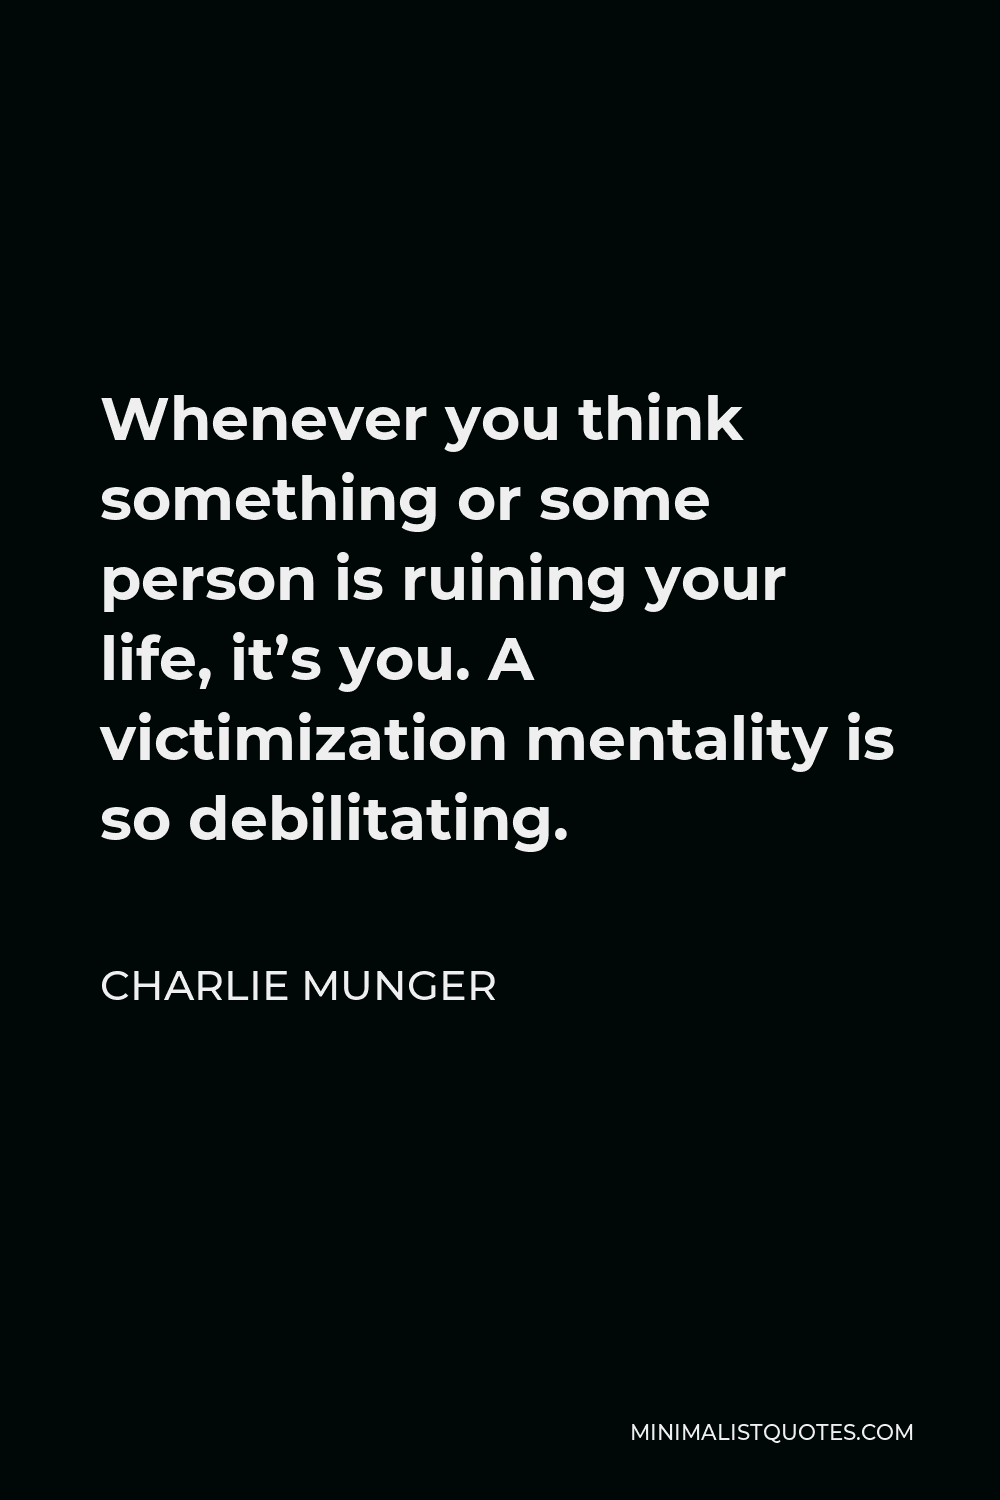 Charlie Munger Quote - Whenever you think something or some person is ruining your life, it’s you. A victimization mentality is so debilitating.